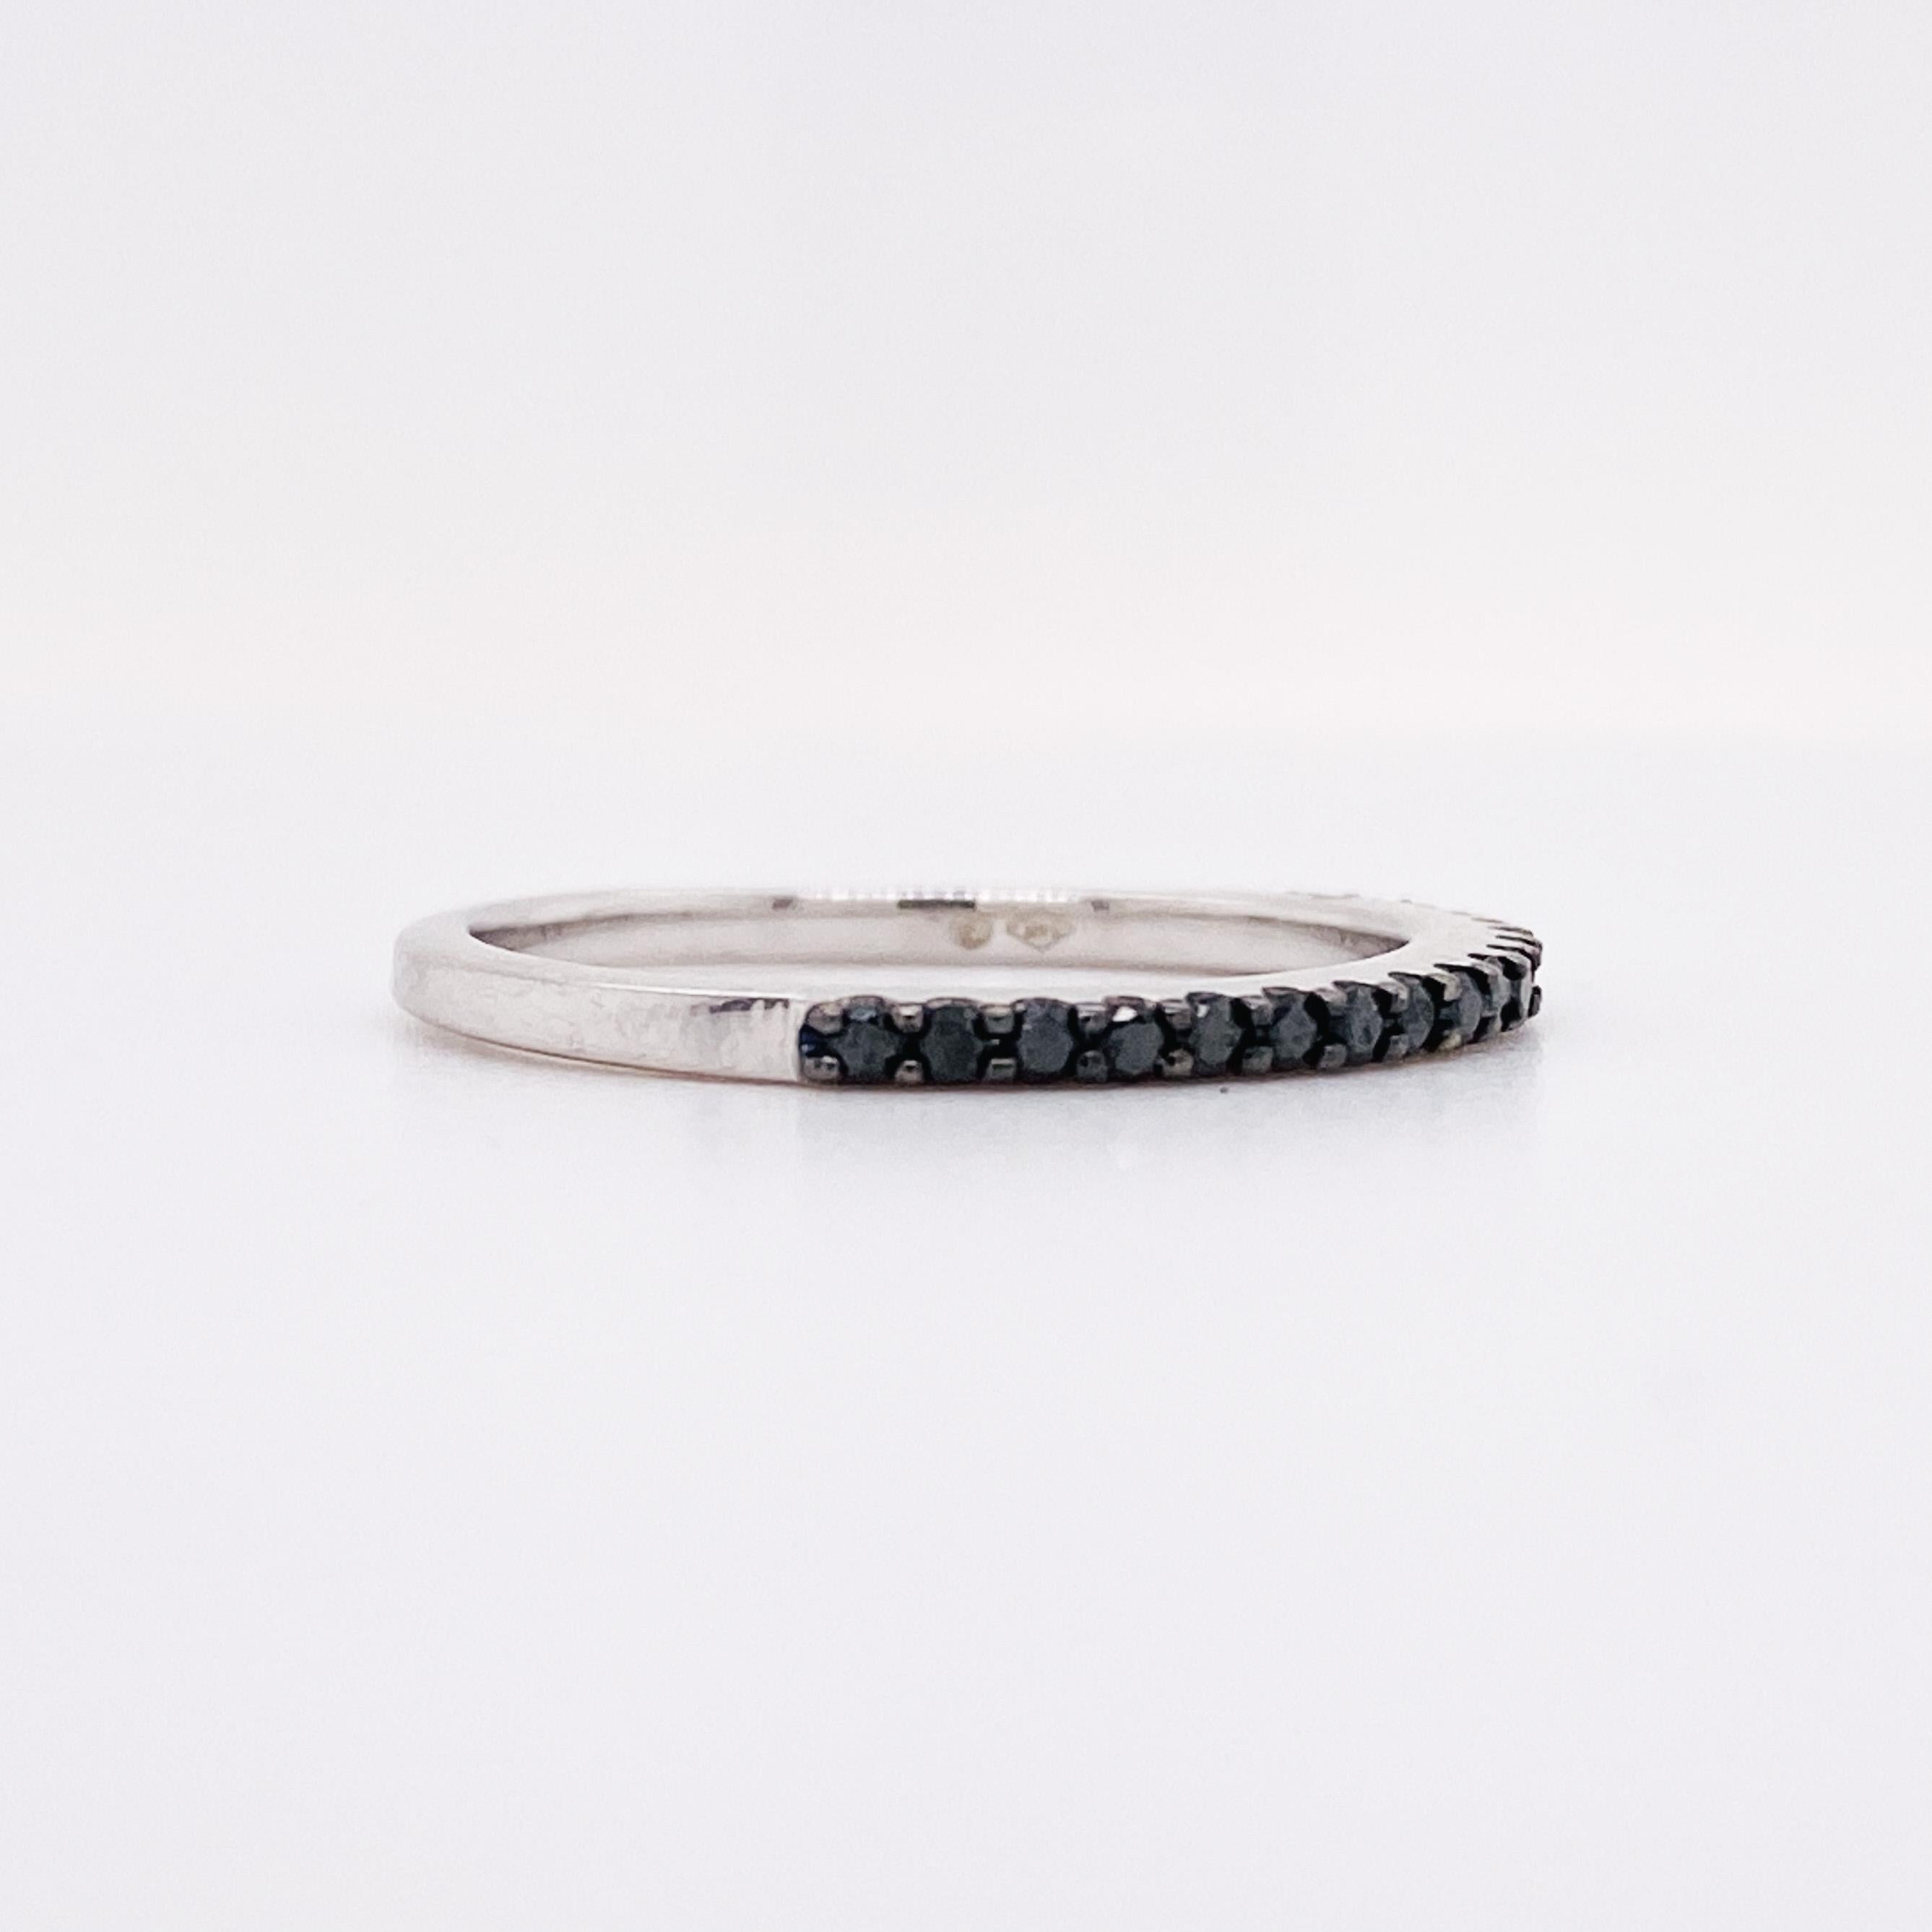 This black diamond band is very unique. The black and white gold are neutral colors that would pair really well with anything. This ring has stones across the top half of the finger. It is very sleek making it the perfect slender stackable band. The